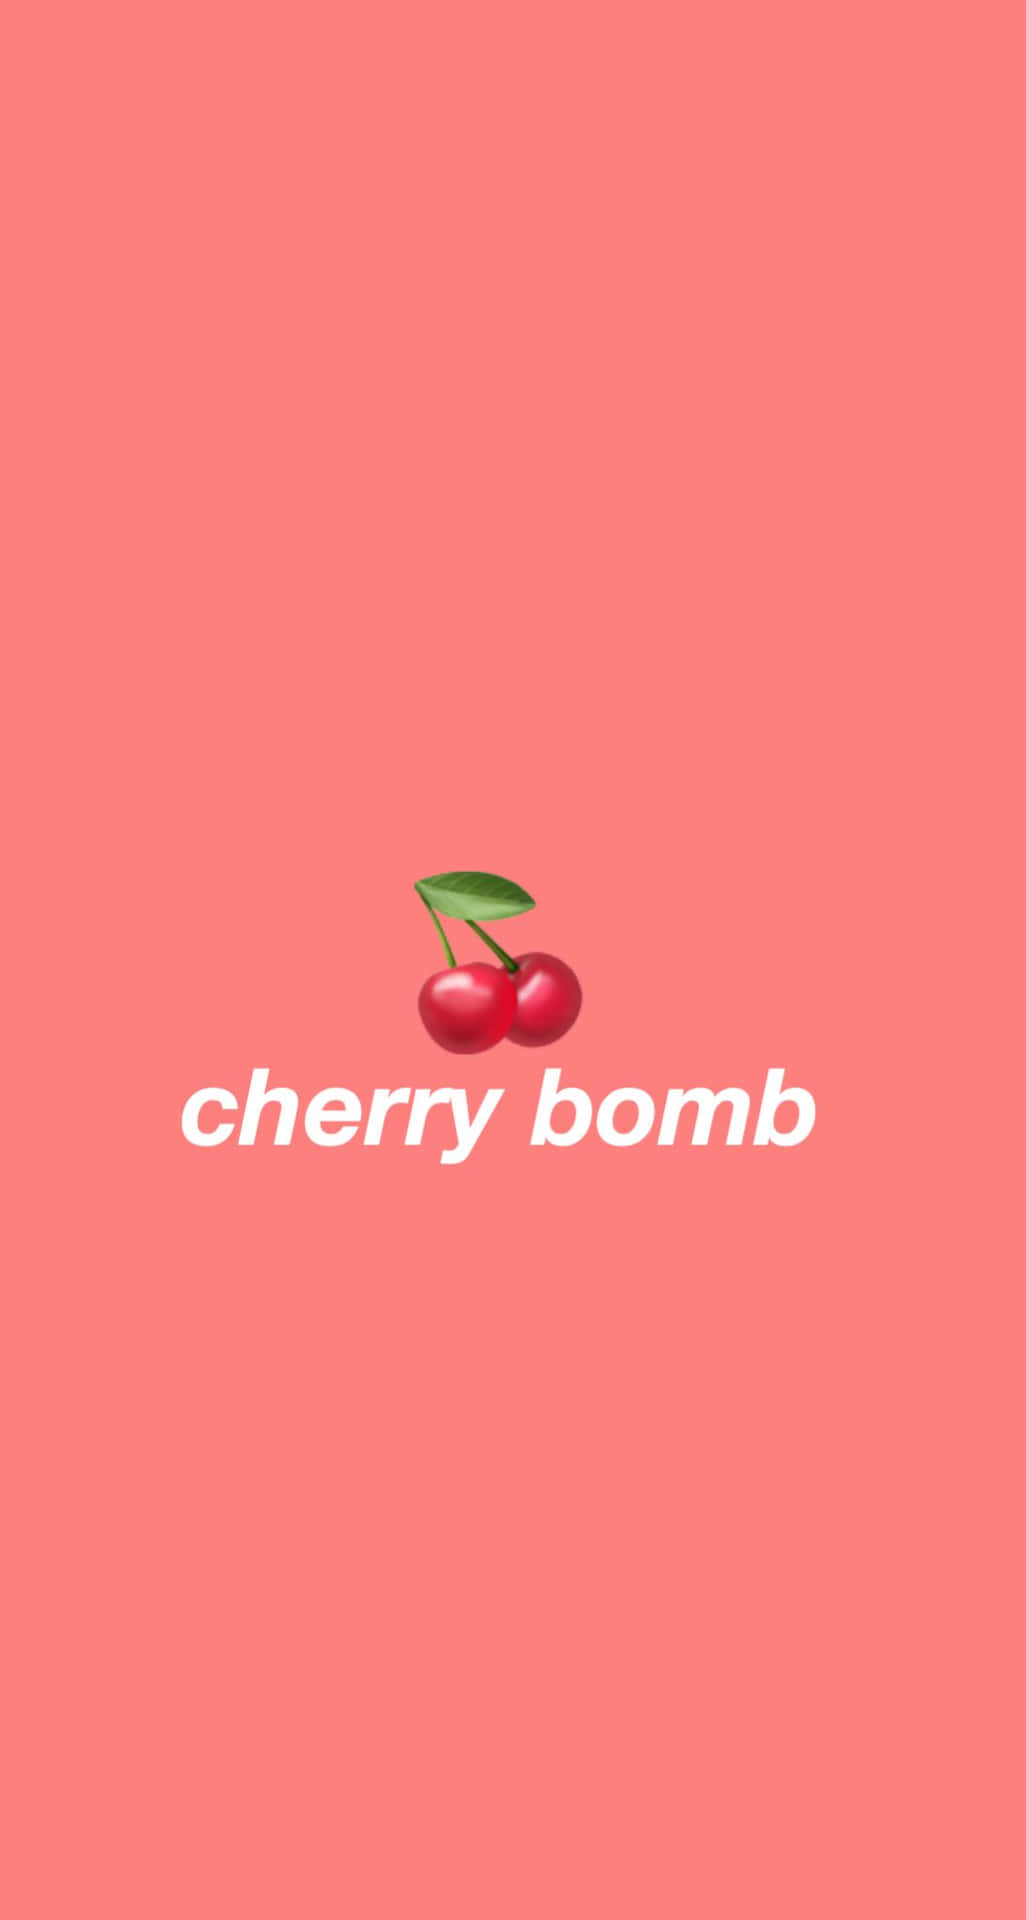 Cherry Bomb HD 720p wallpaper by zsmash  Download on ZEDGE  32bd